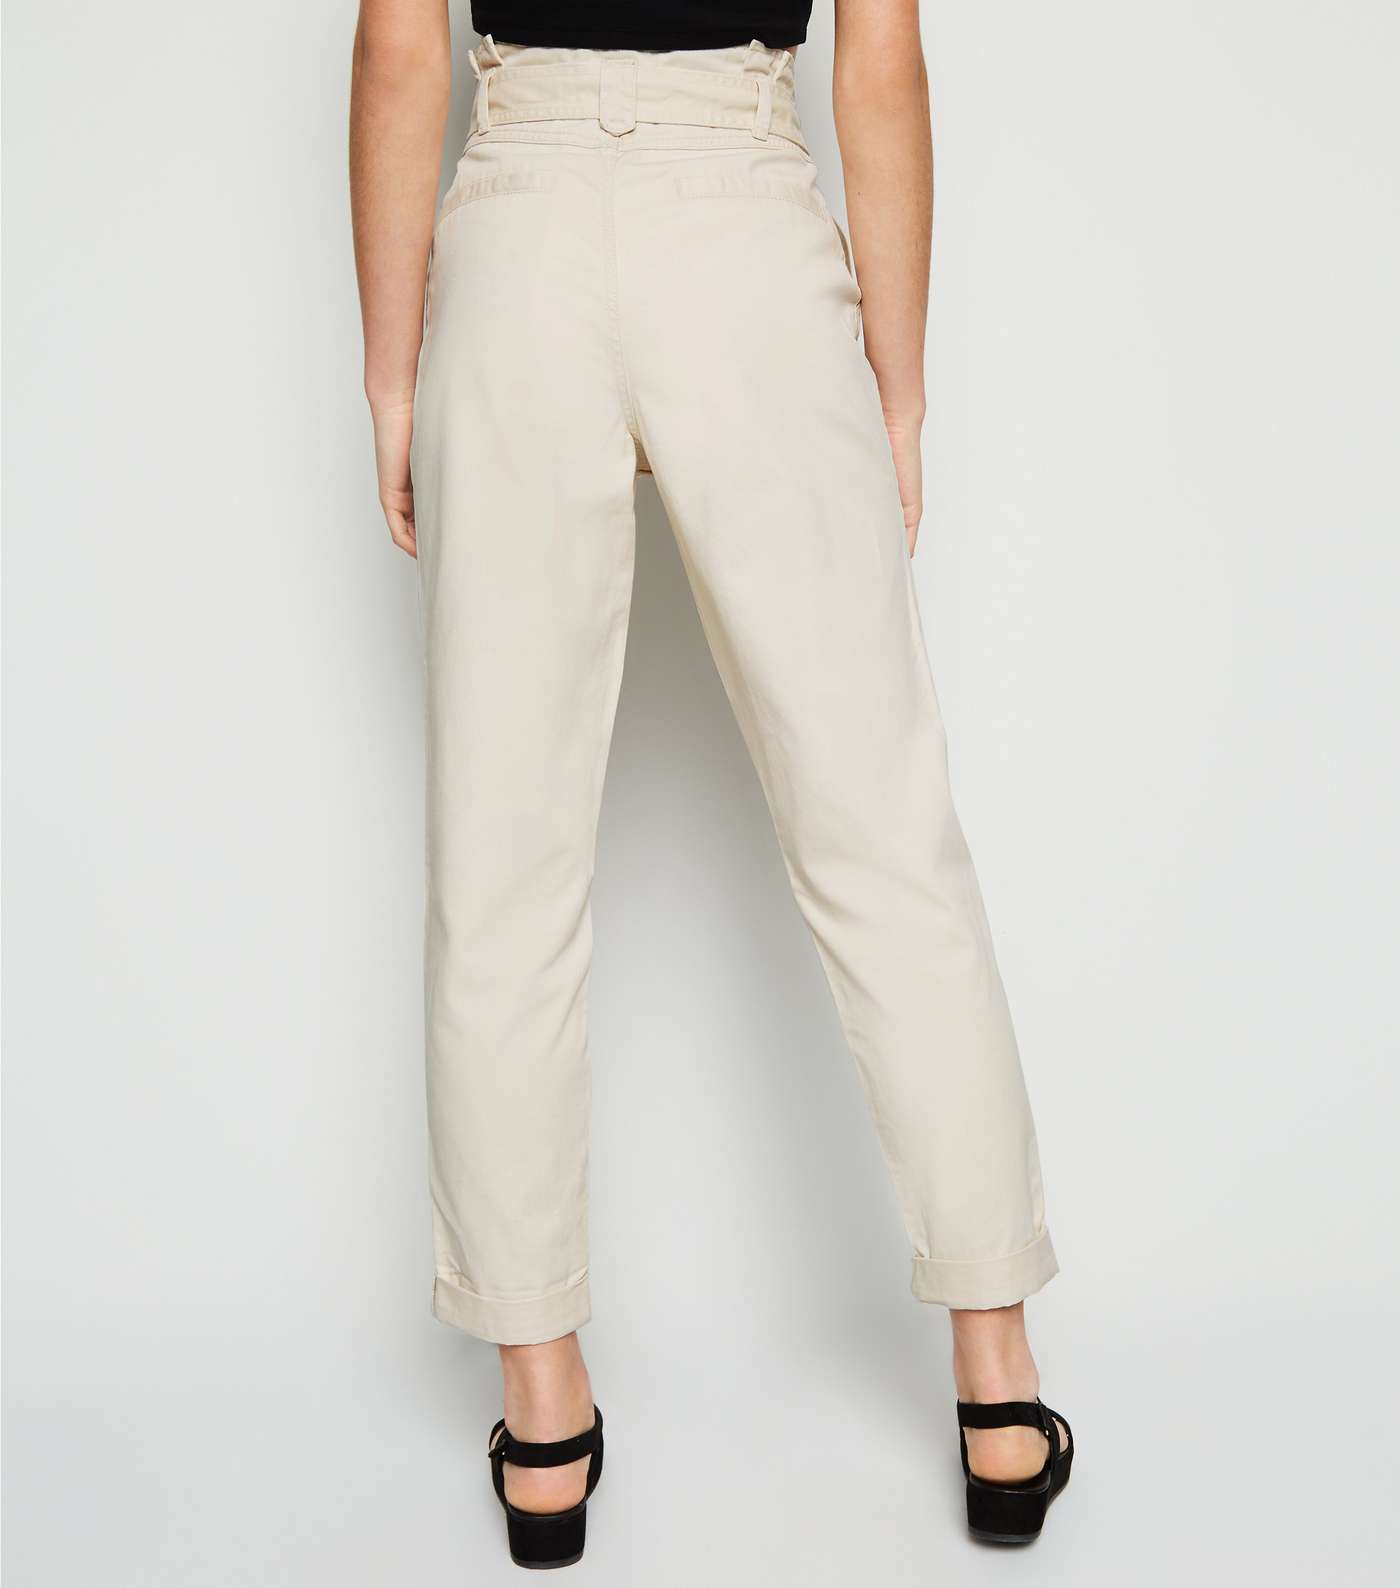 Off White High Waist Tapered Denim Trousers Image 3